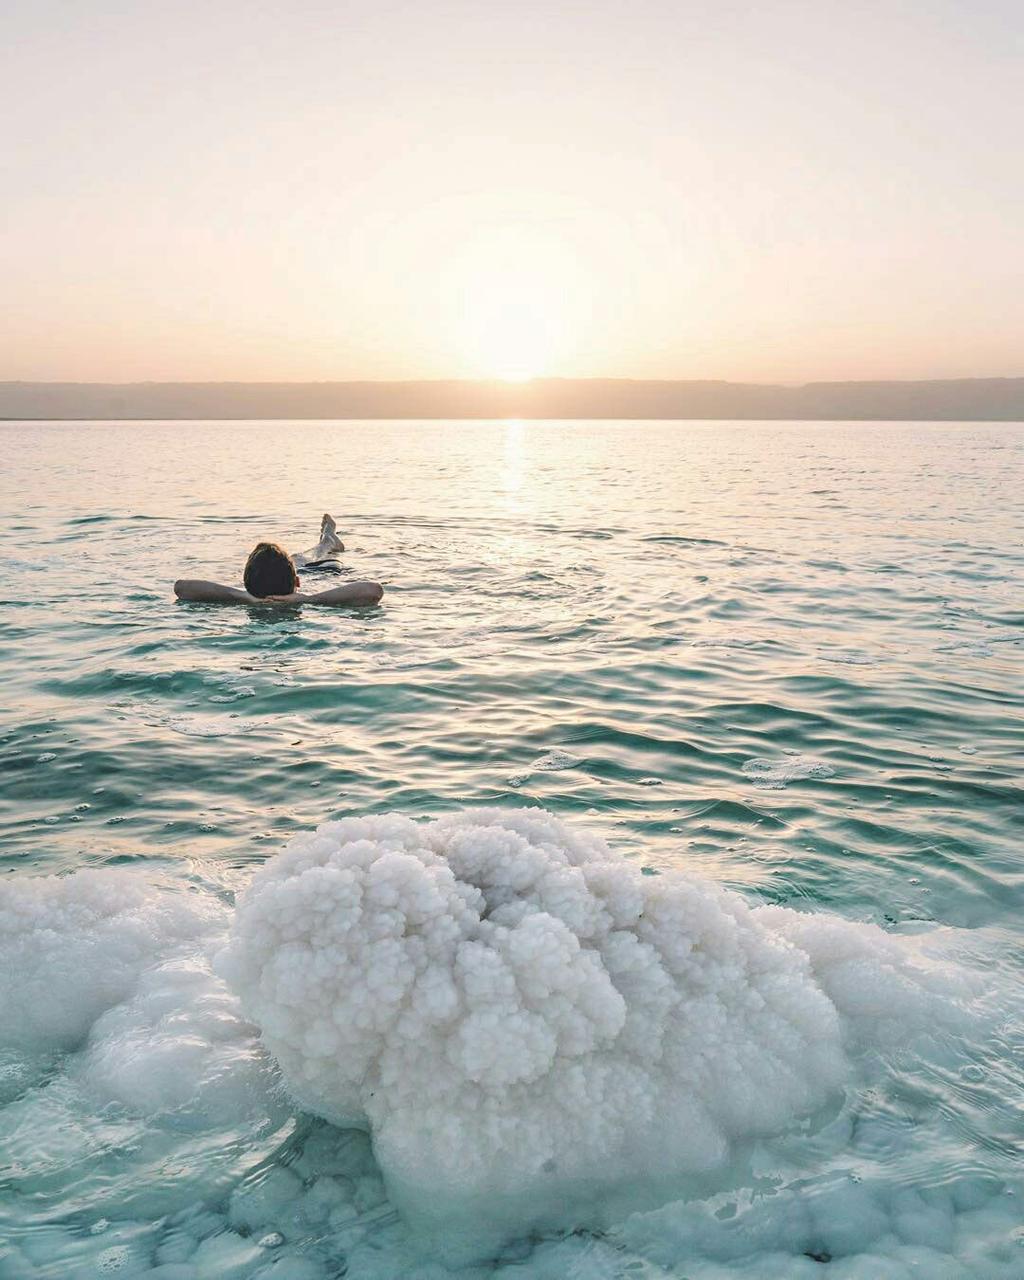 About RivaCrystals From the lowest point on earth and the world s richest source of natural salts - the Dead Sea, Riva Crystals presents to you a unique blend of minerals with an extraordinary